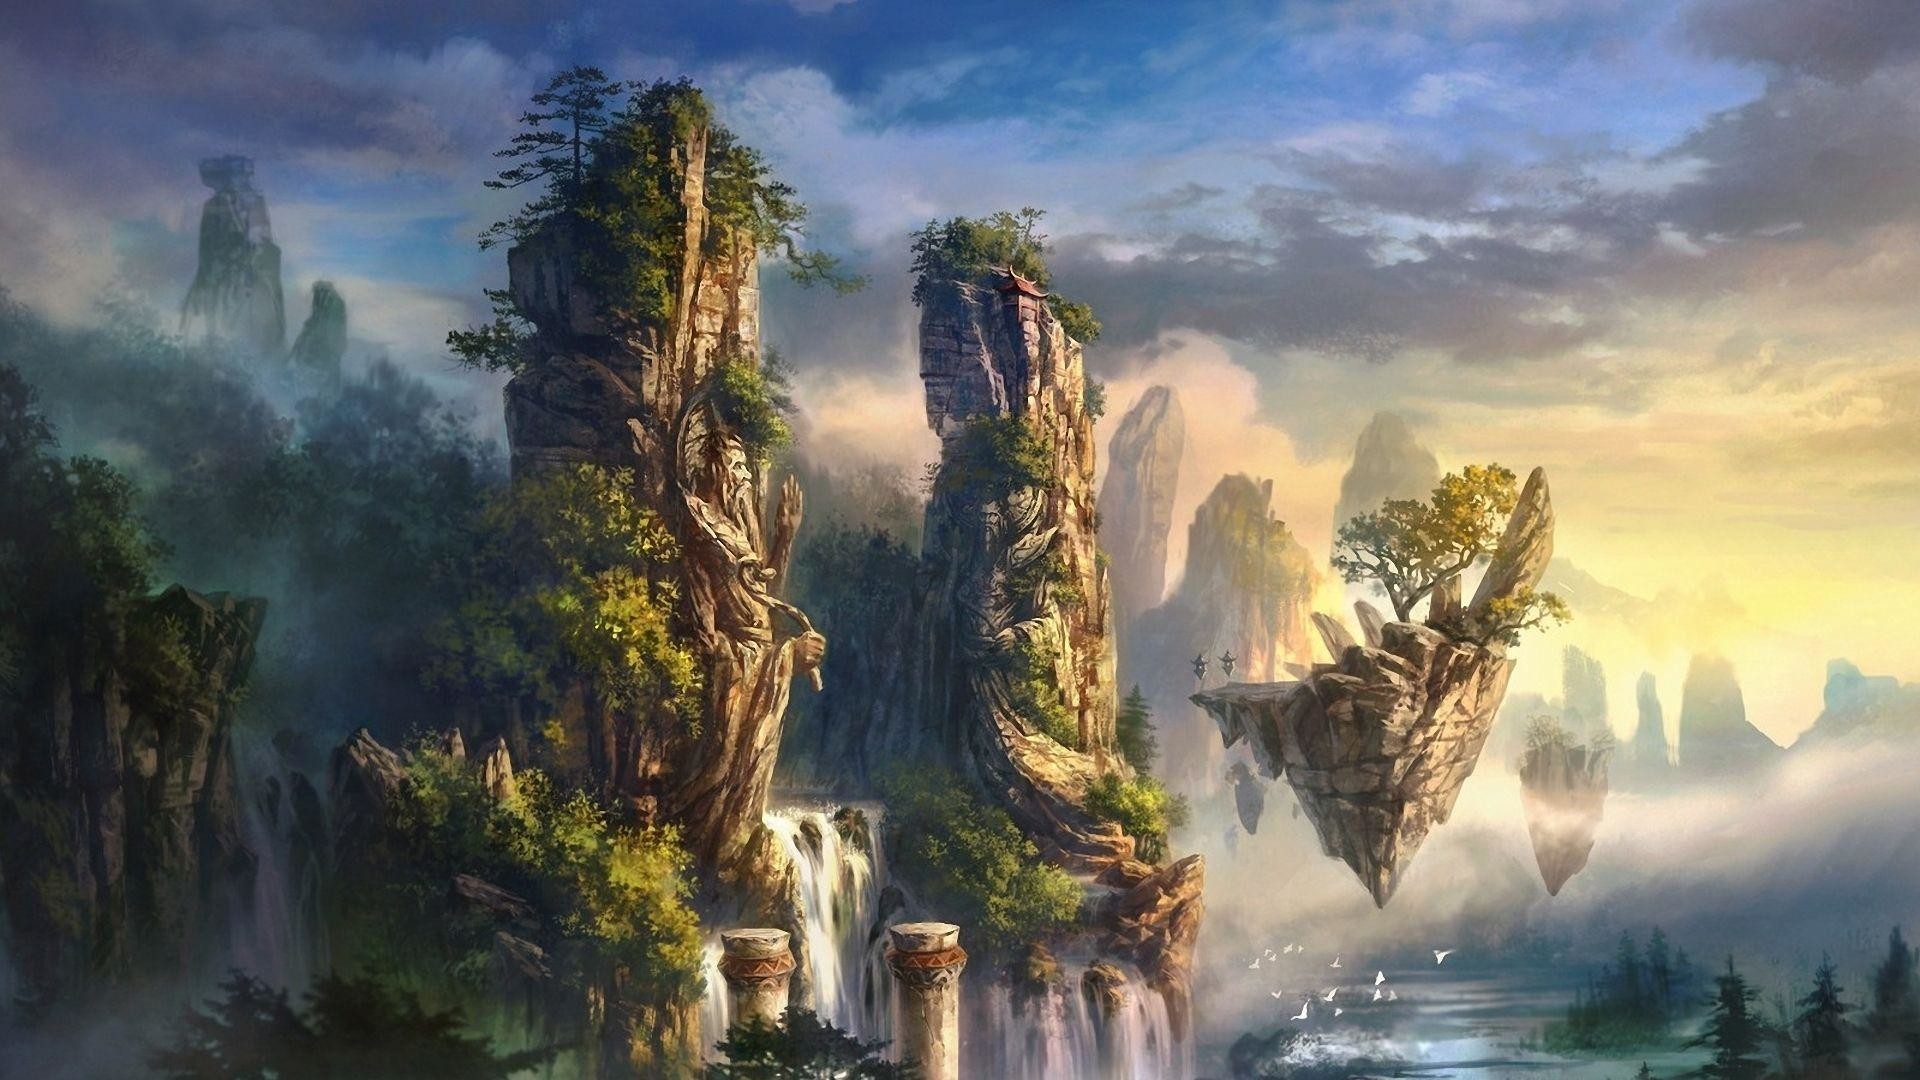 1920x1080 Hanging Gardens Of Babylon Wallpapers HD Backgrounds .